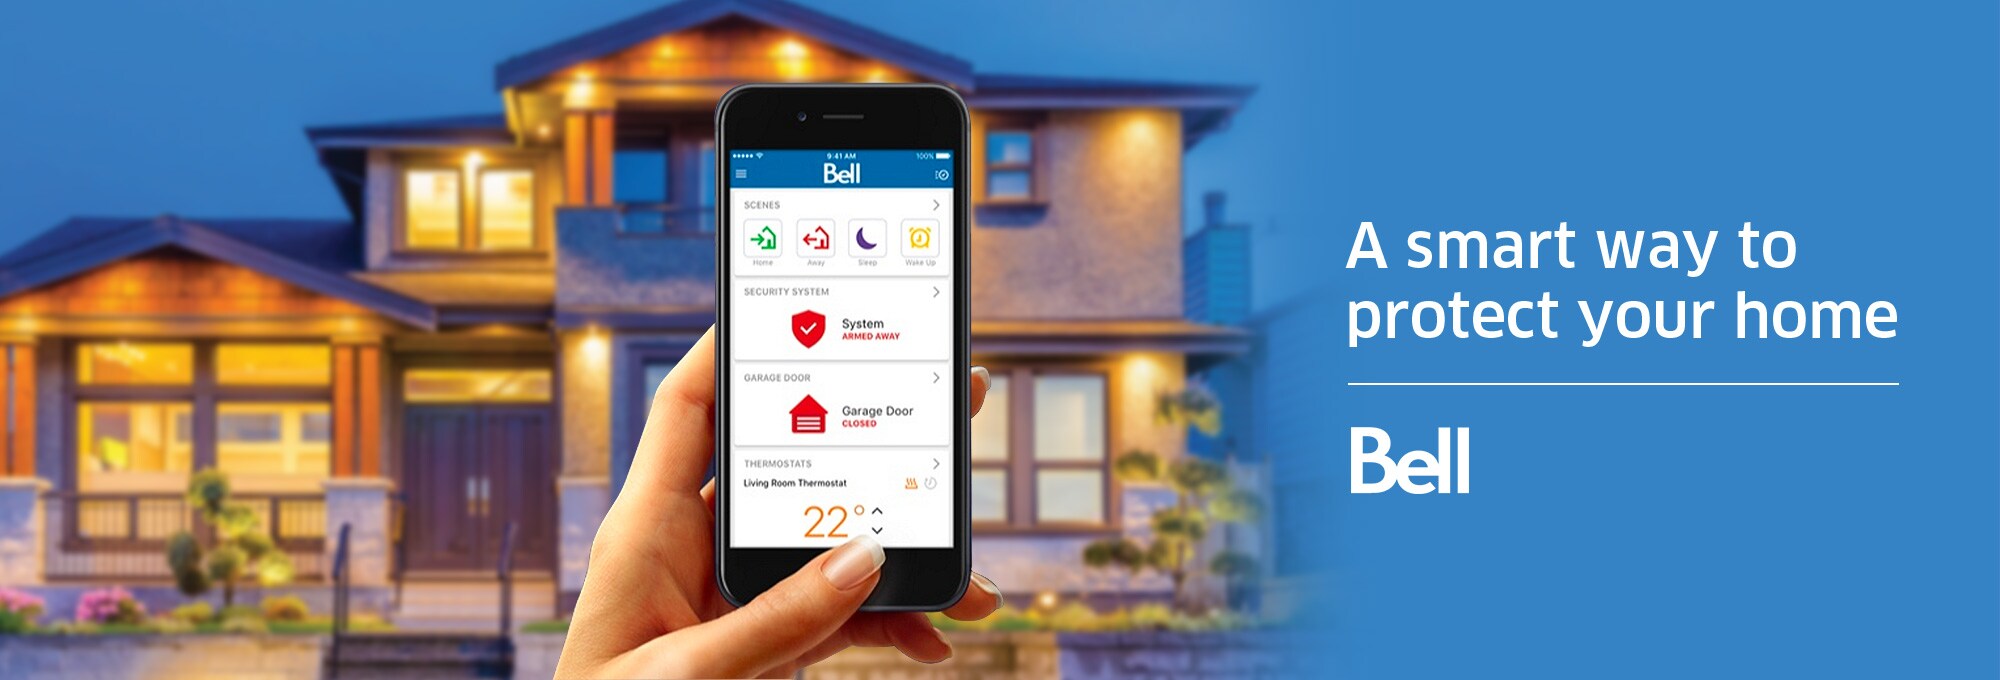 BELL SMART HOME | The Source